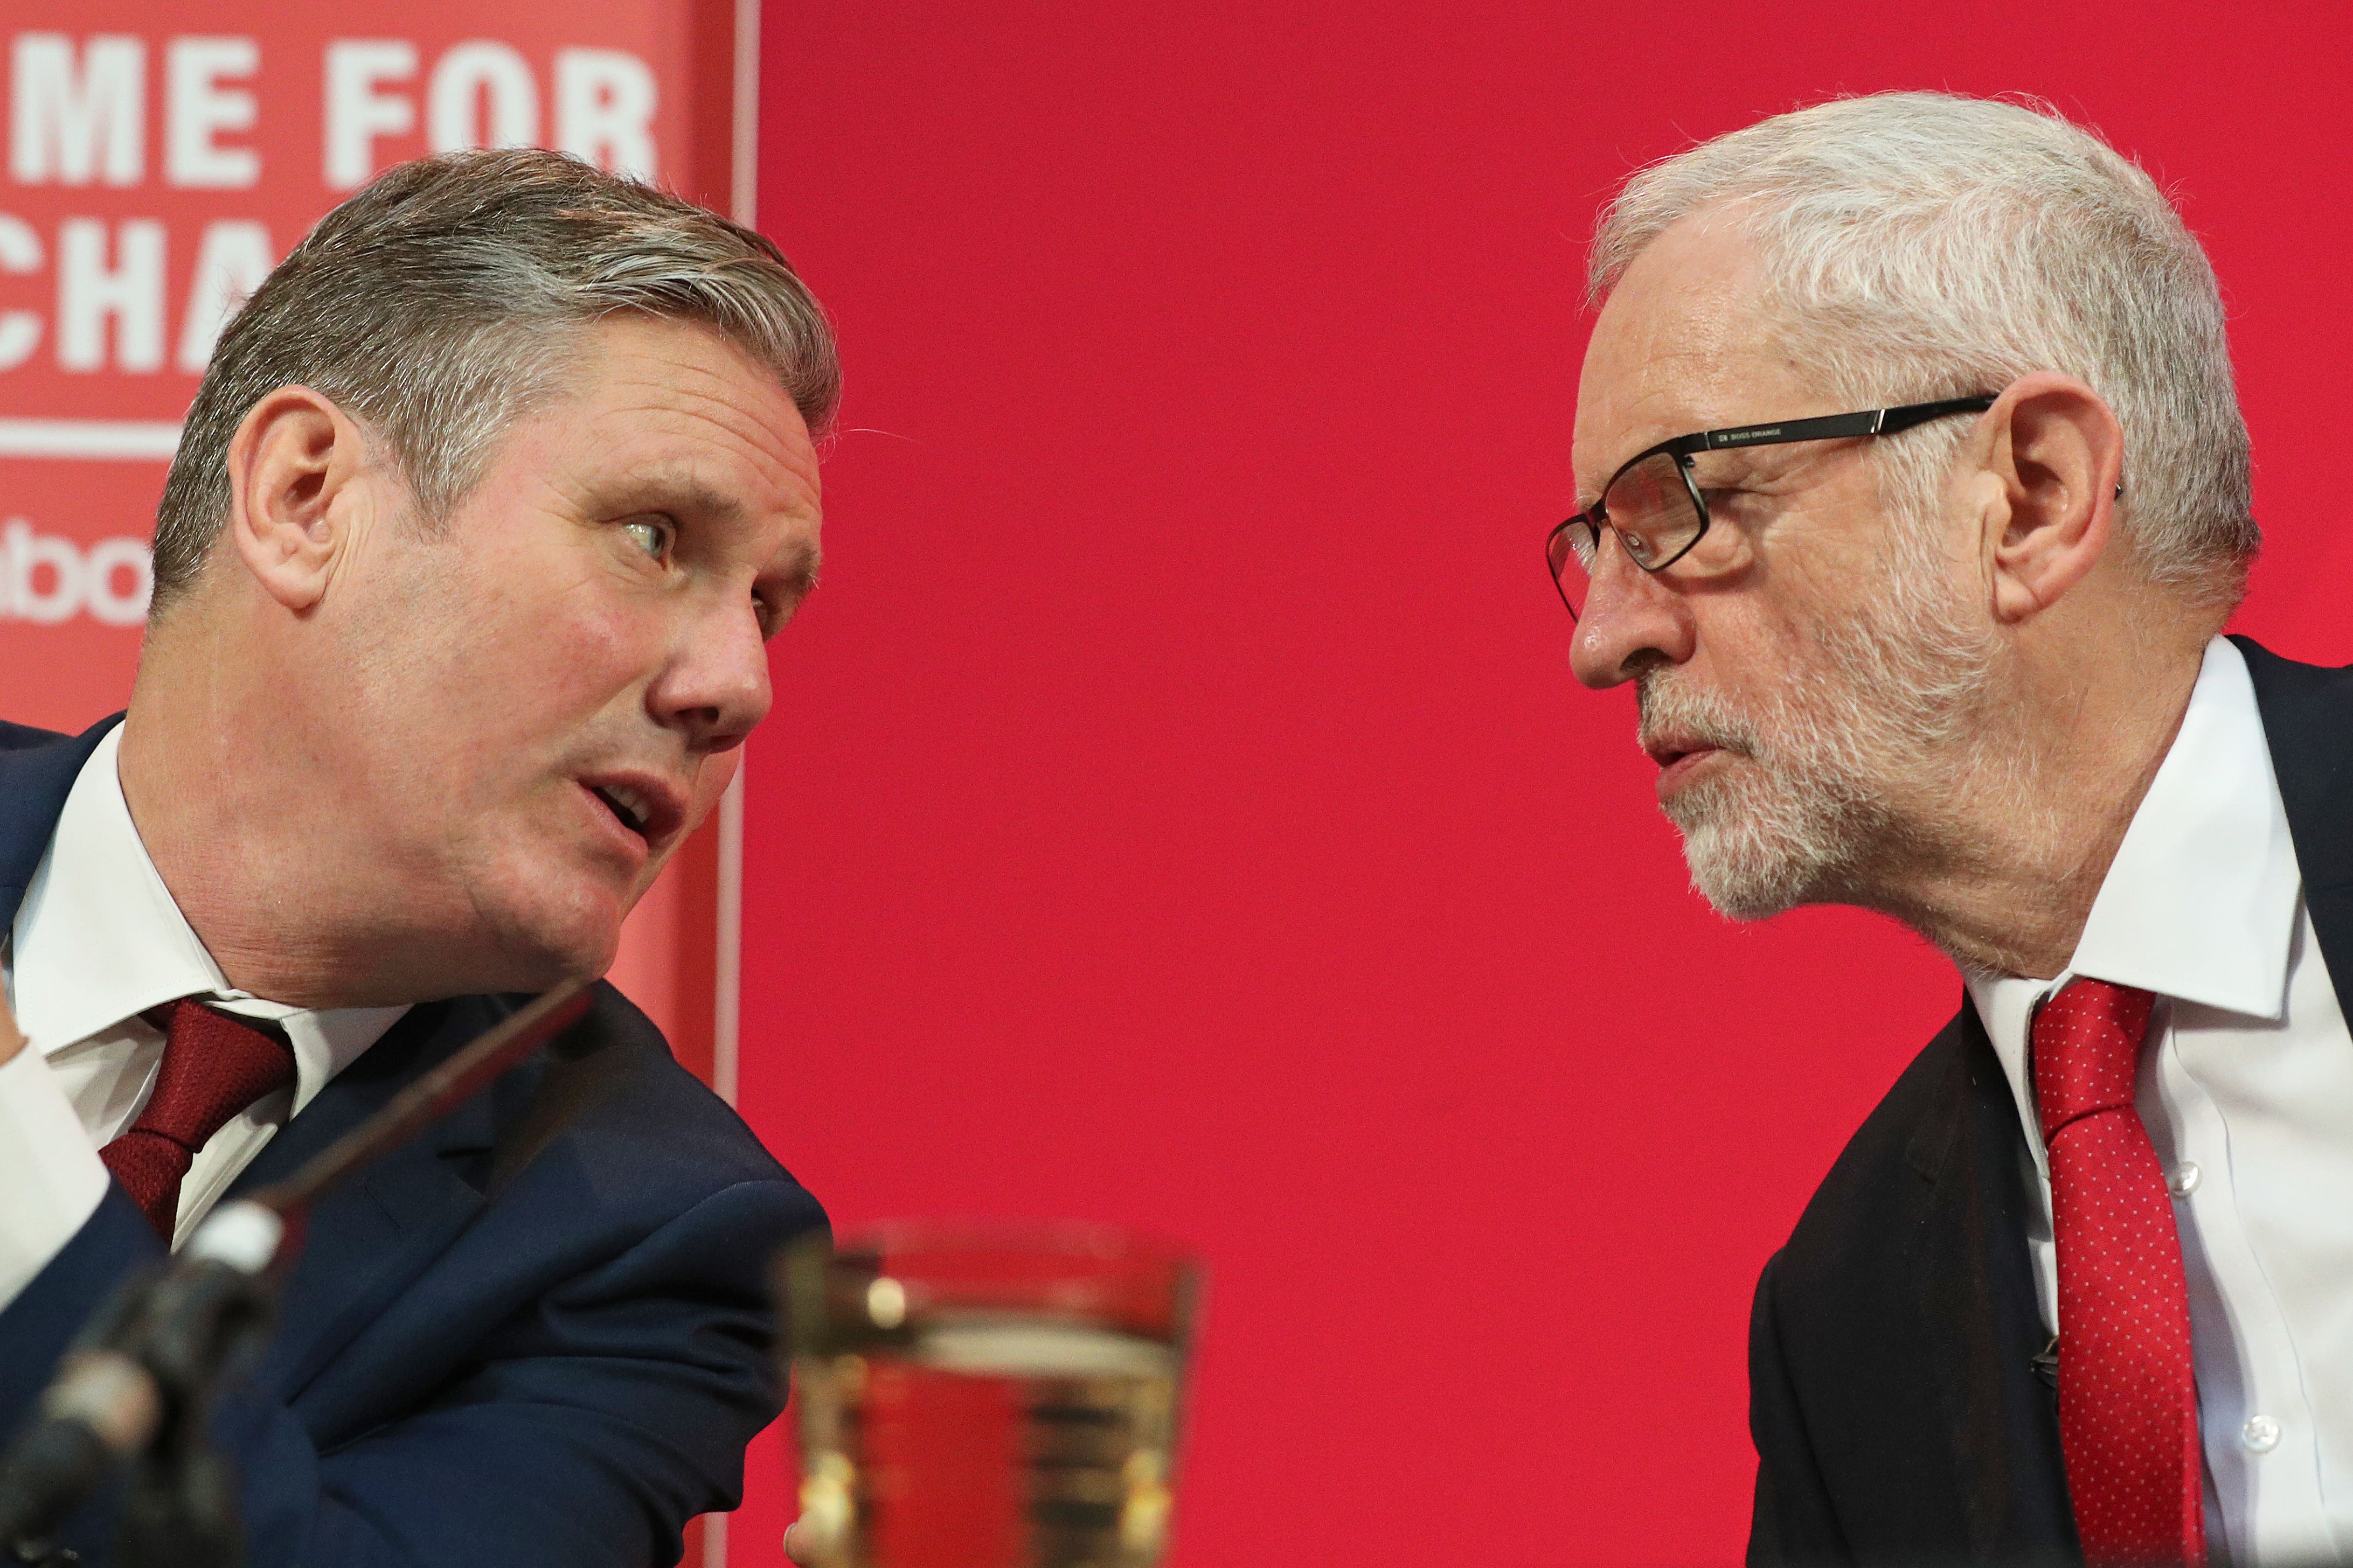 keir starmer, jeremy corbyn, corbyn accuses starmer of ‘not being honest about the past’ after criticism of 2019 campaign